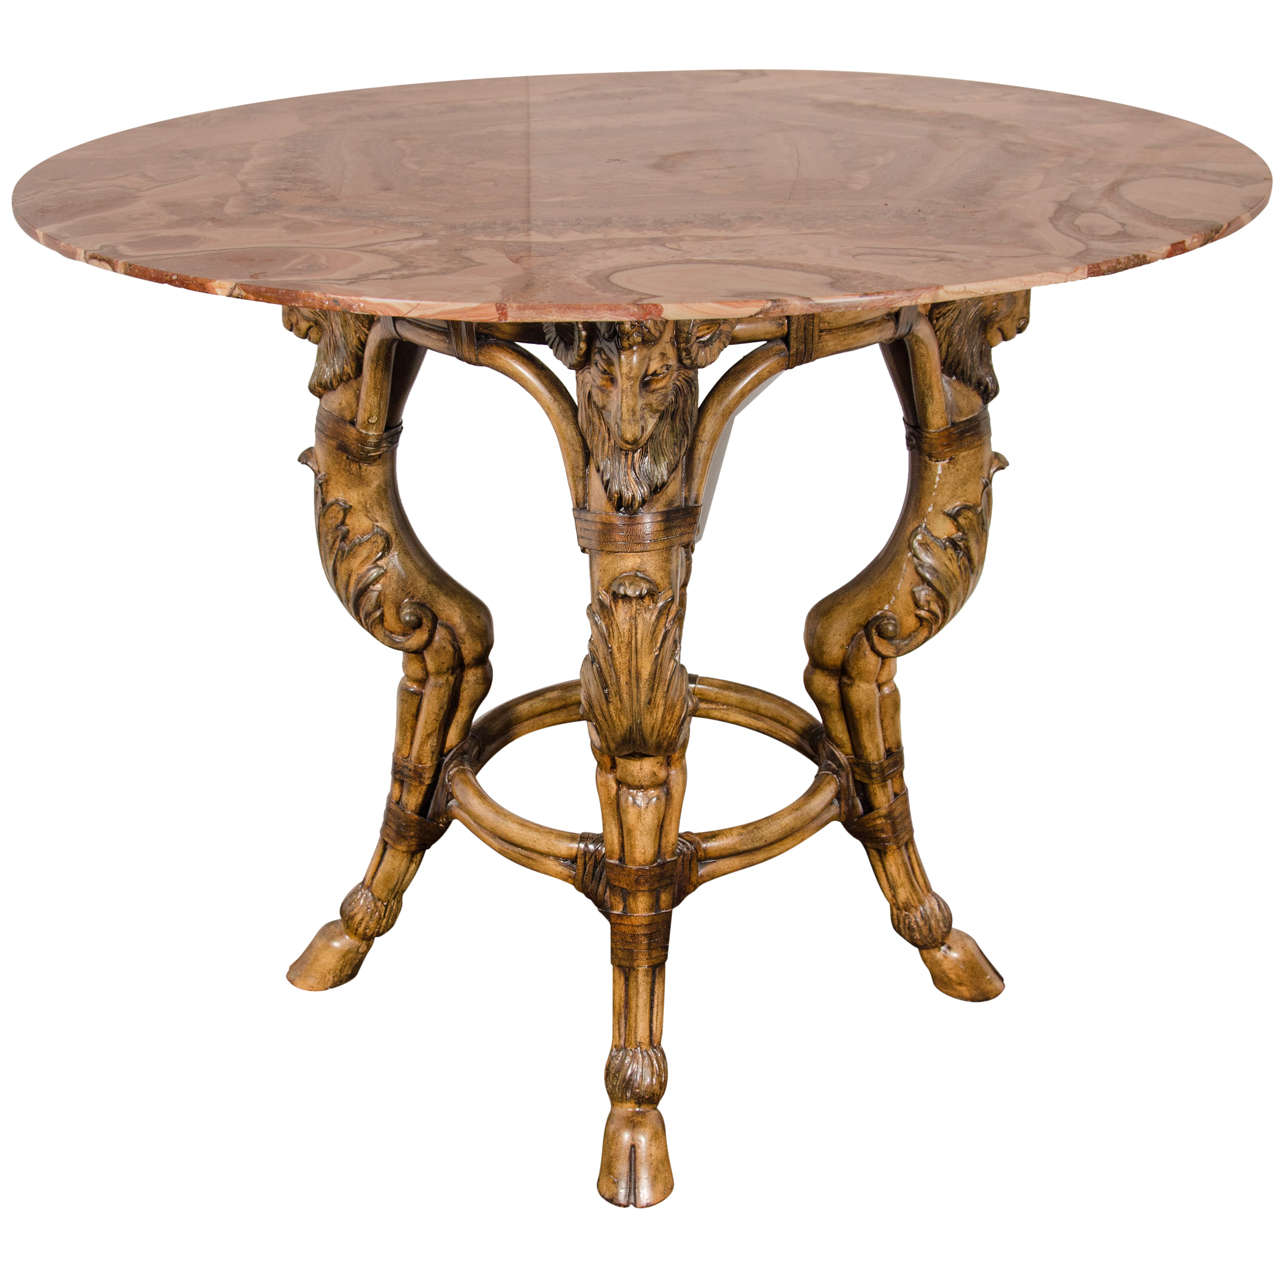 Rare Onyx Center Table with Unique Carved Wood Base at 1stdibs